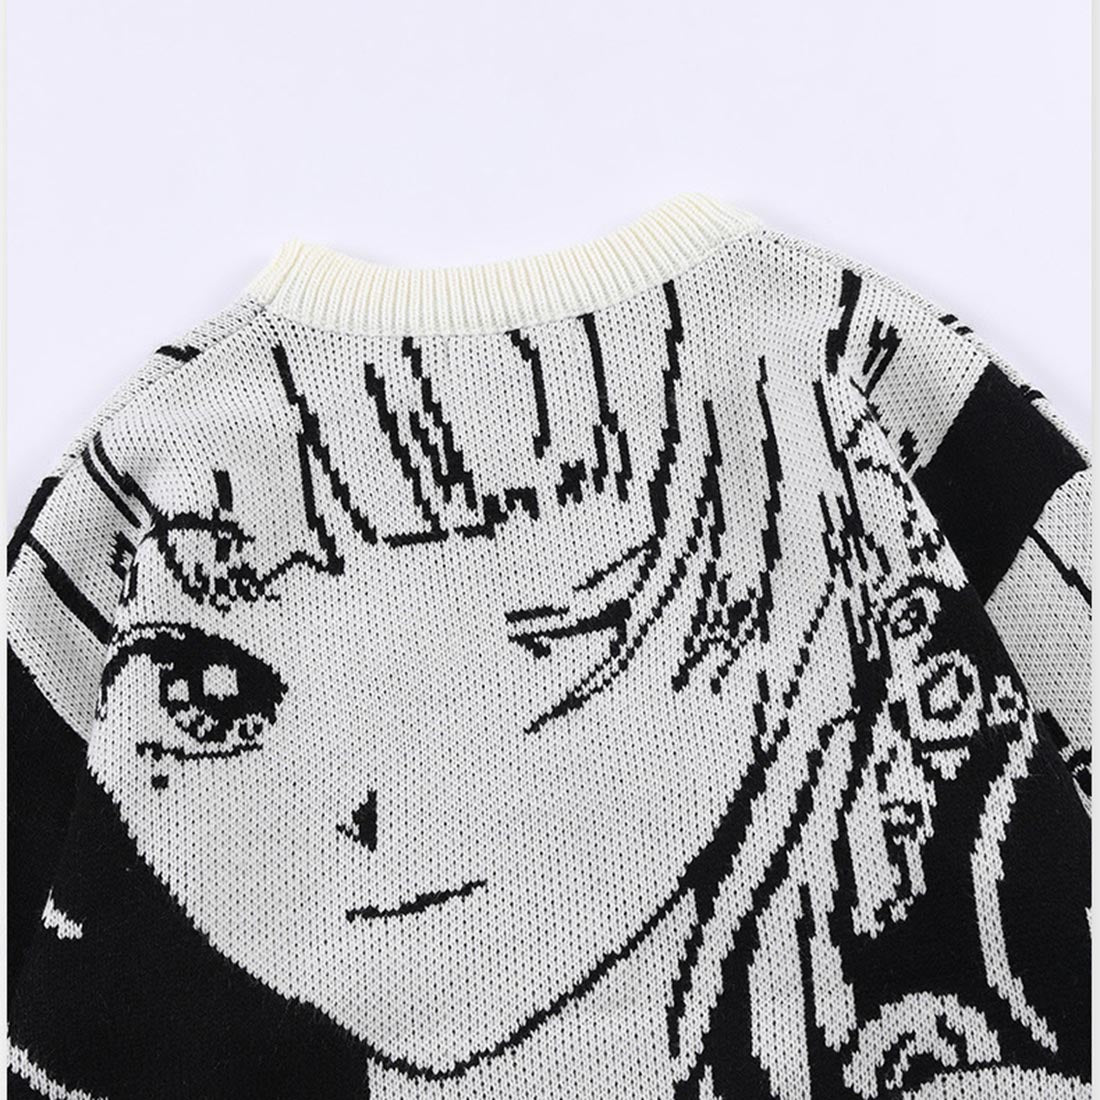 "GOOD THINGS" PRINTED KNITTED SWEATER